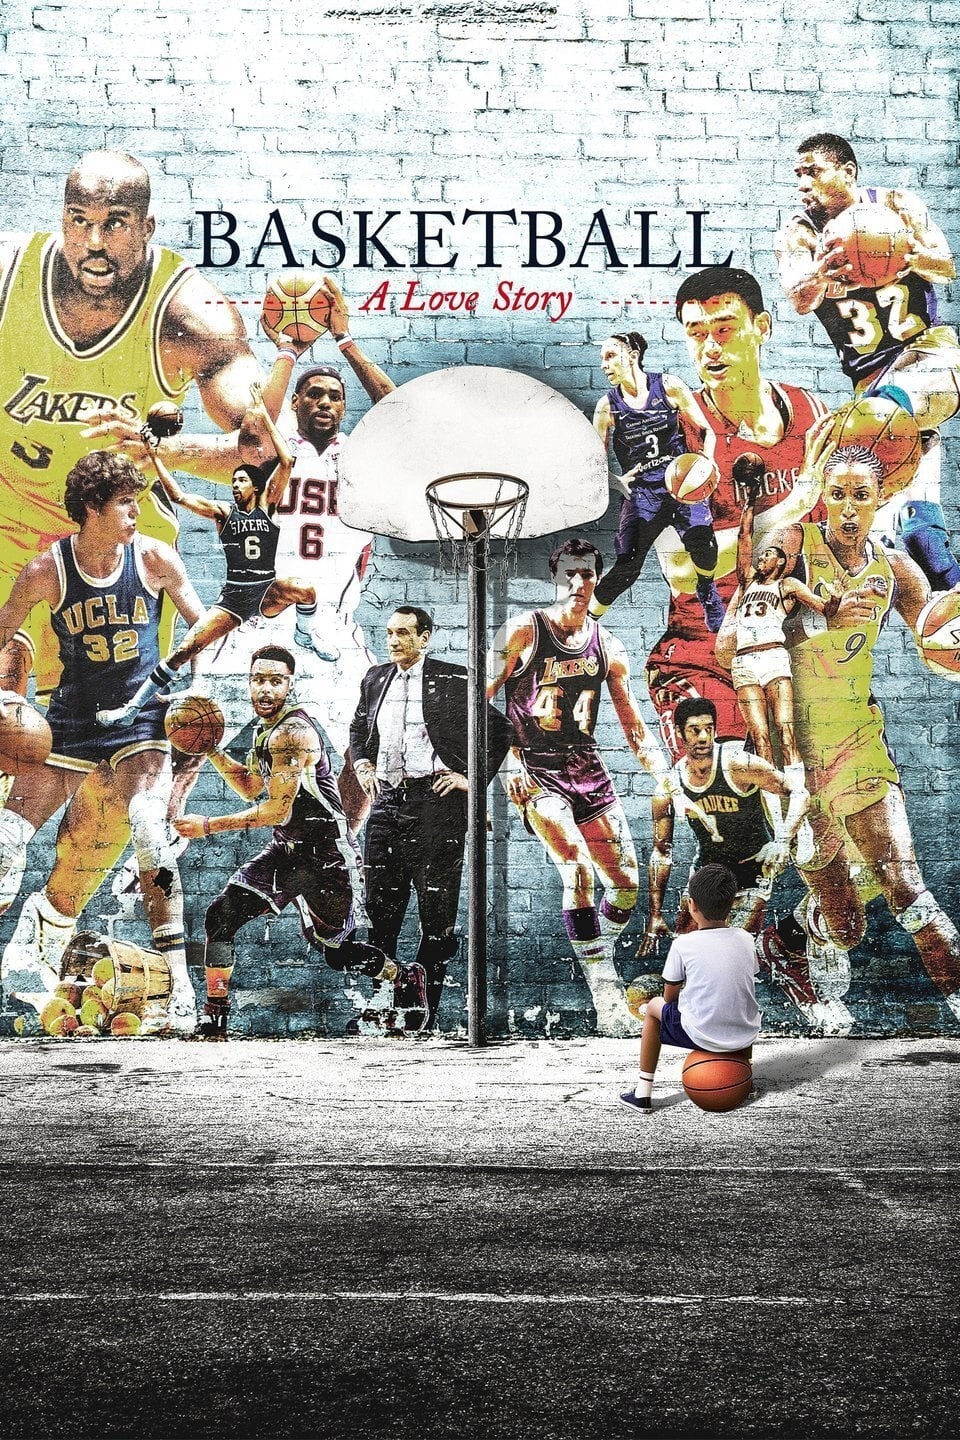 Personal Narrative: My Love For Basketball